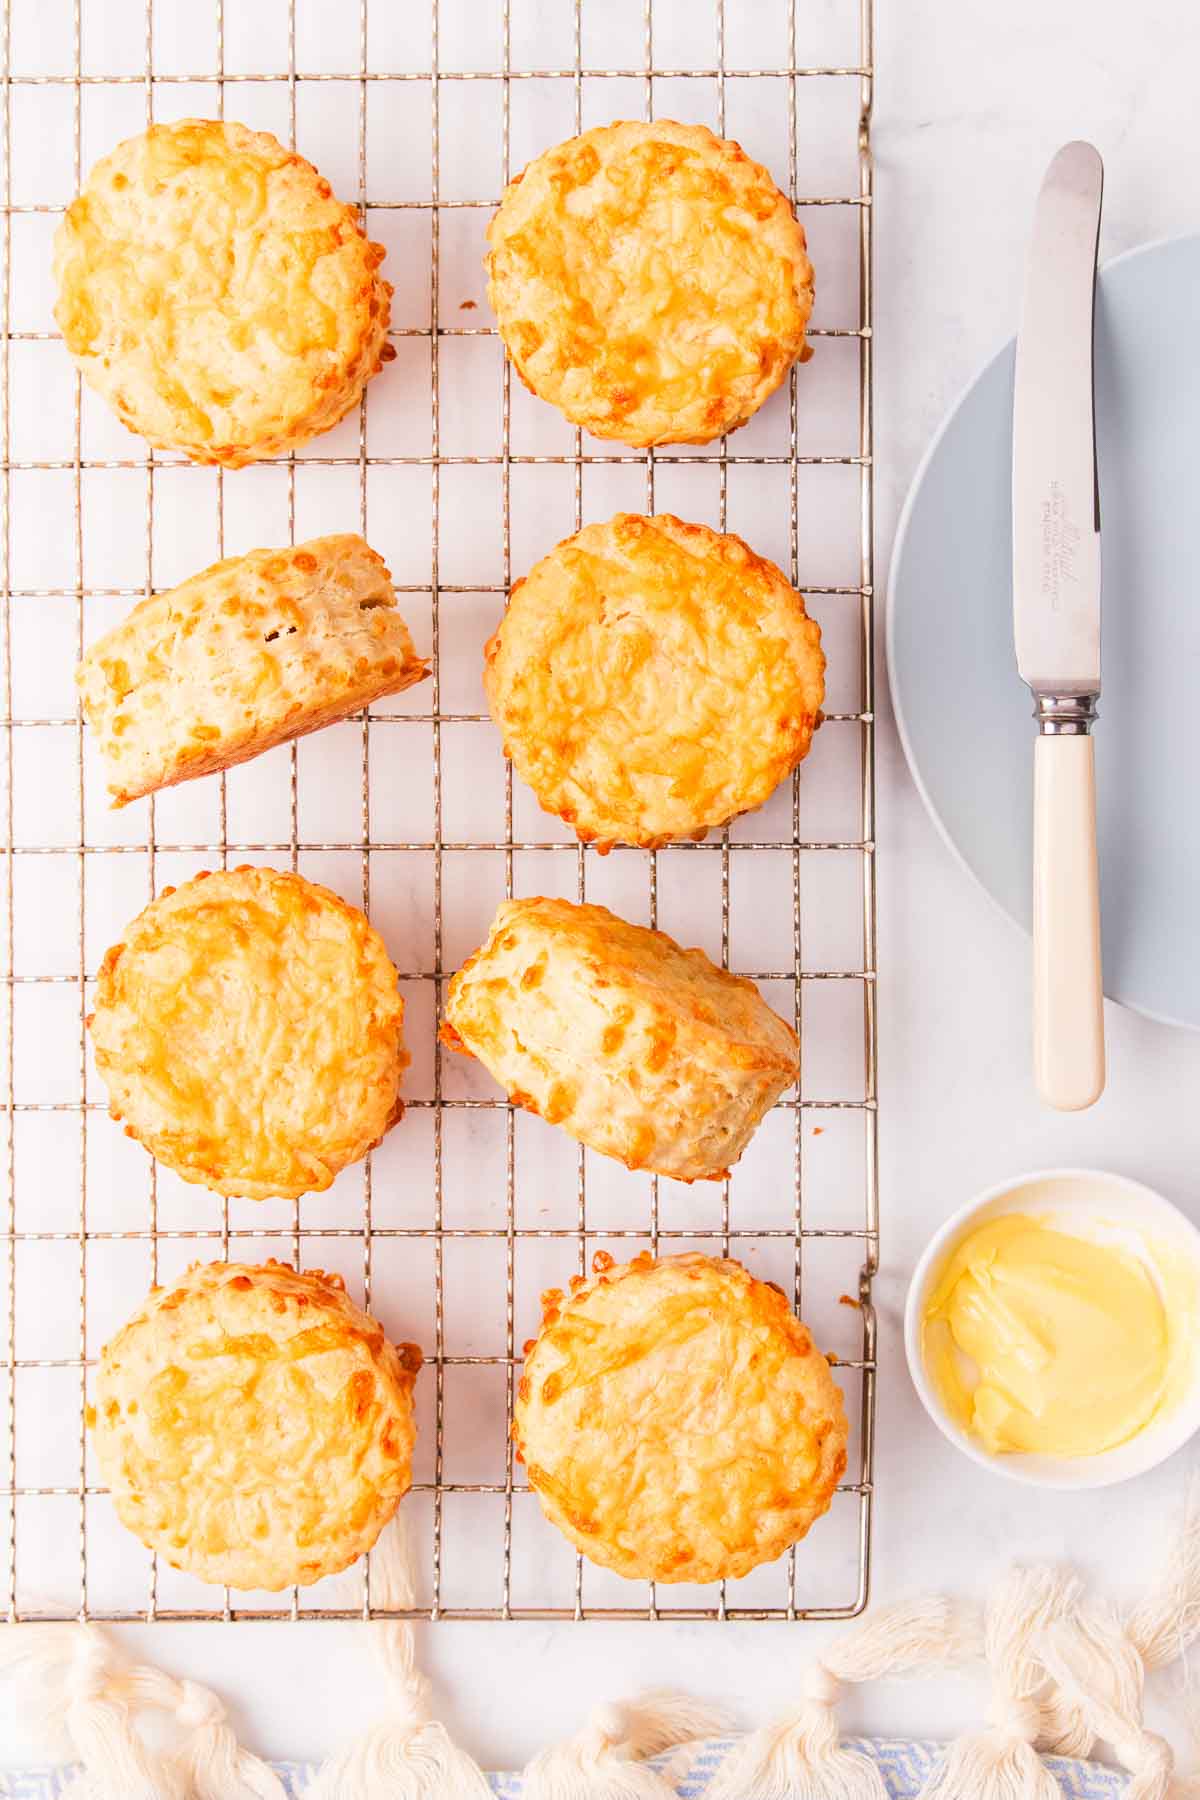 8 cheese scones on a wire cooling rack, with a small dish of butter and a light blue plate with a bone handled knife resting on it.